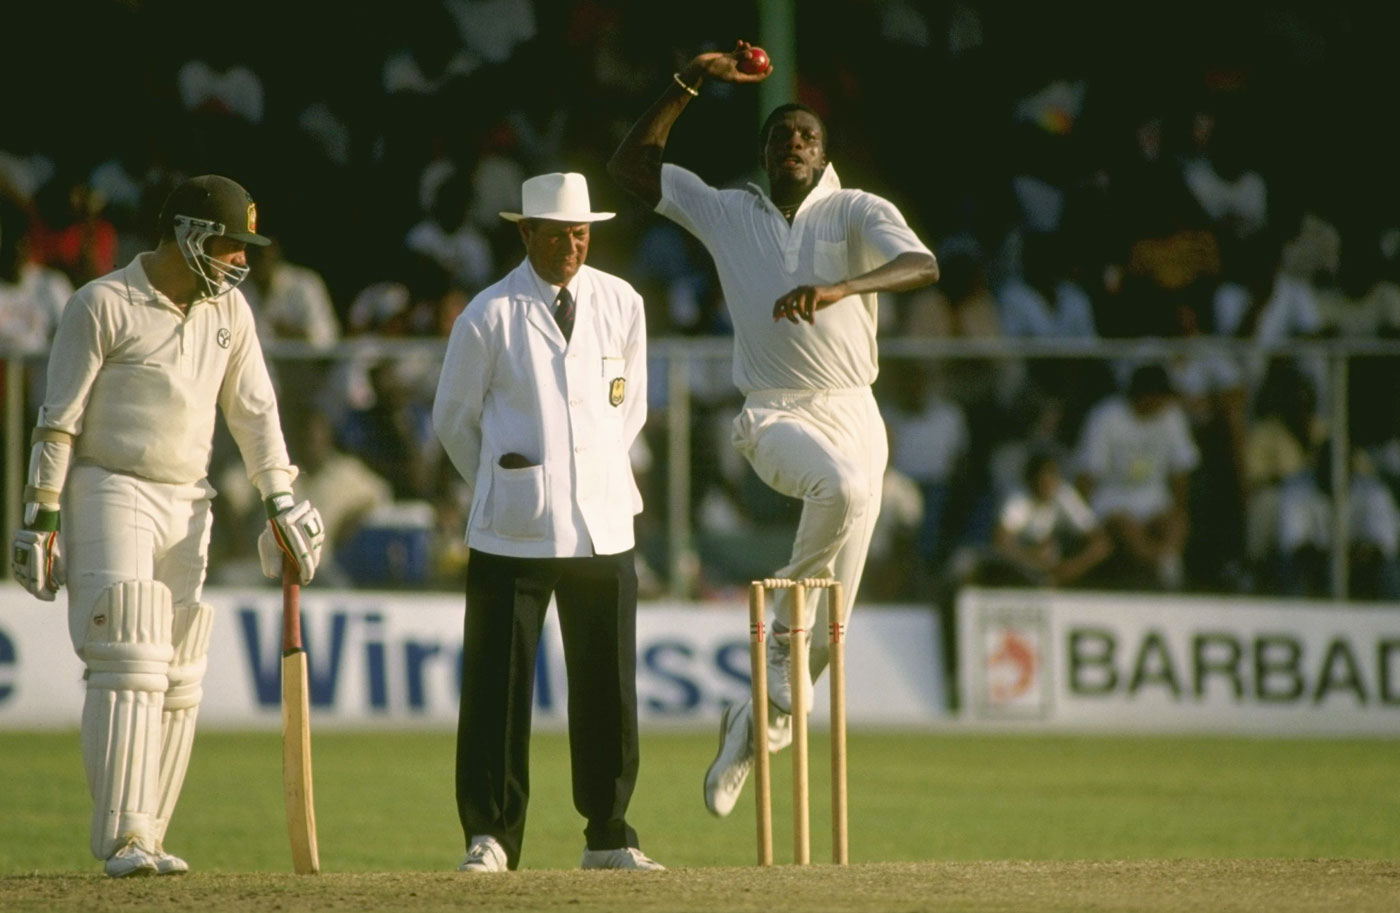 West Indies fast bowling great Curtly Ambrose